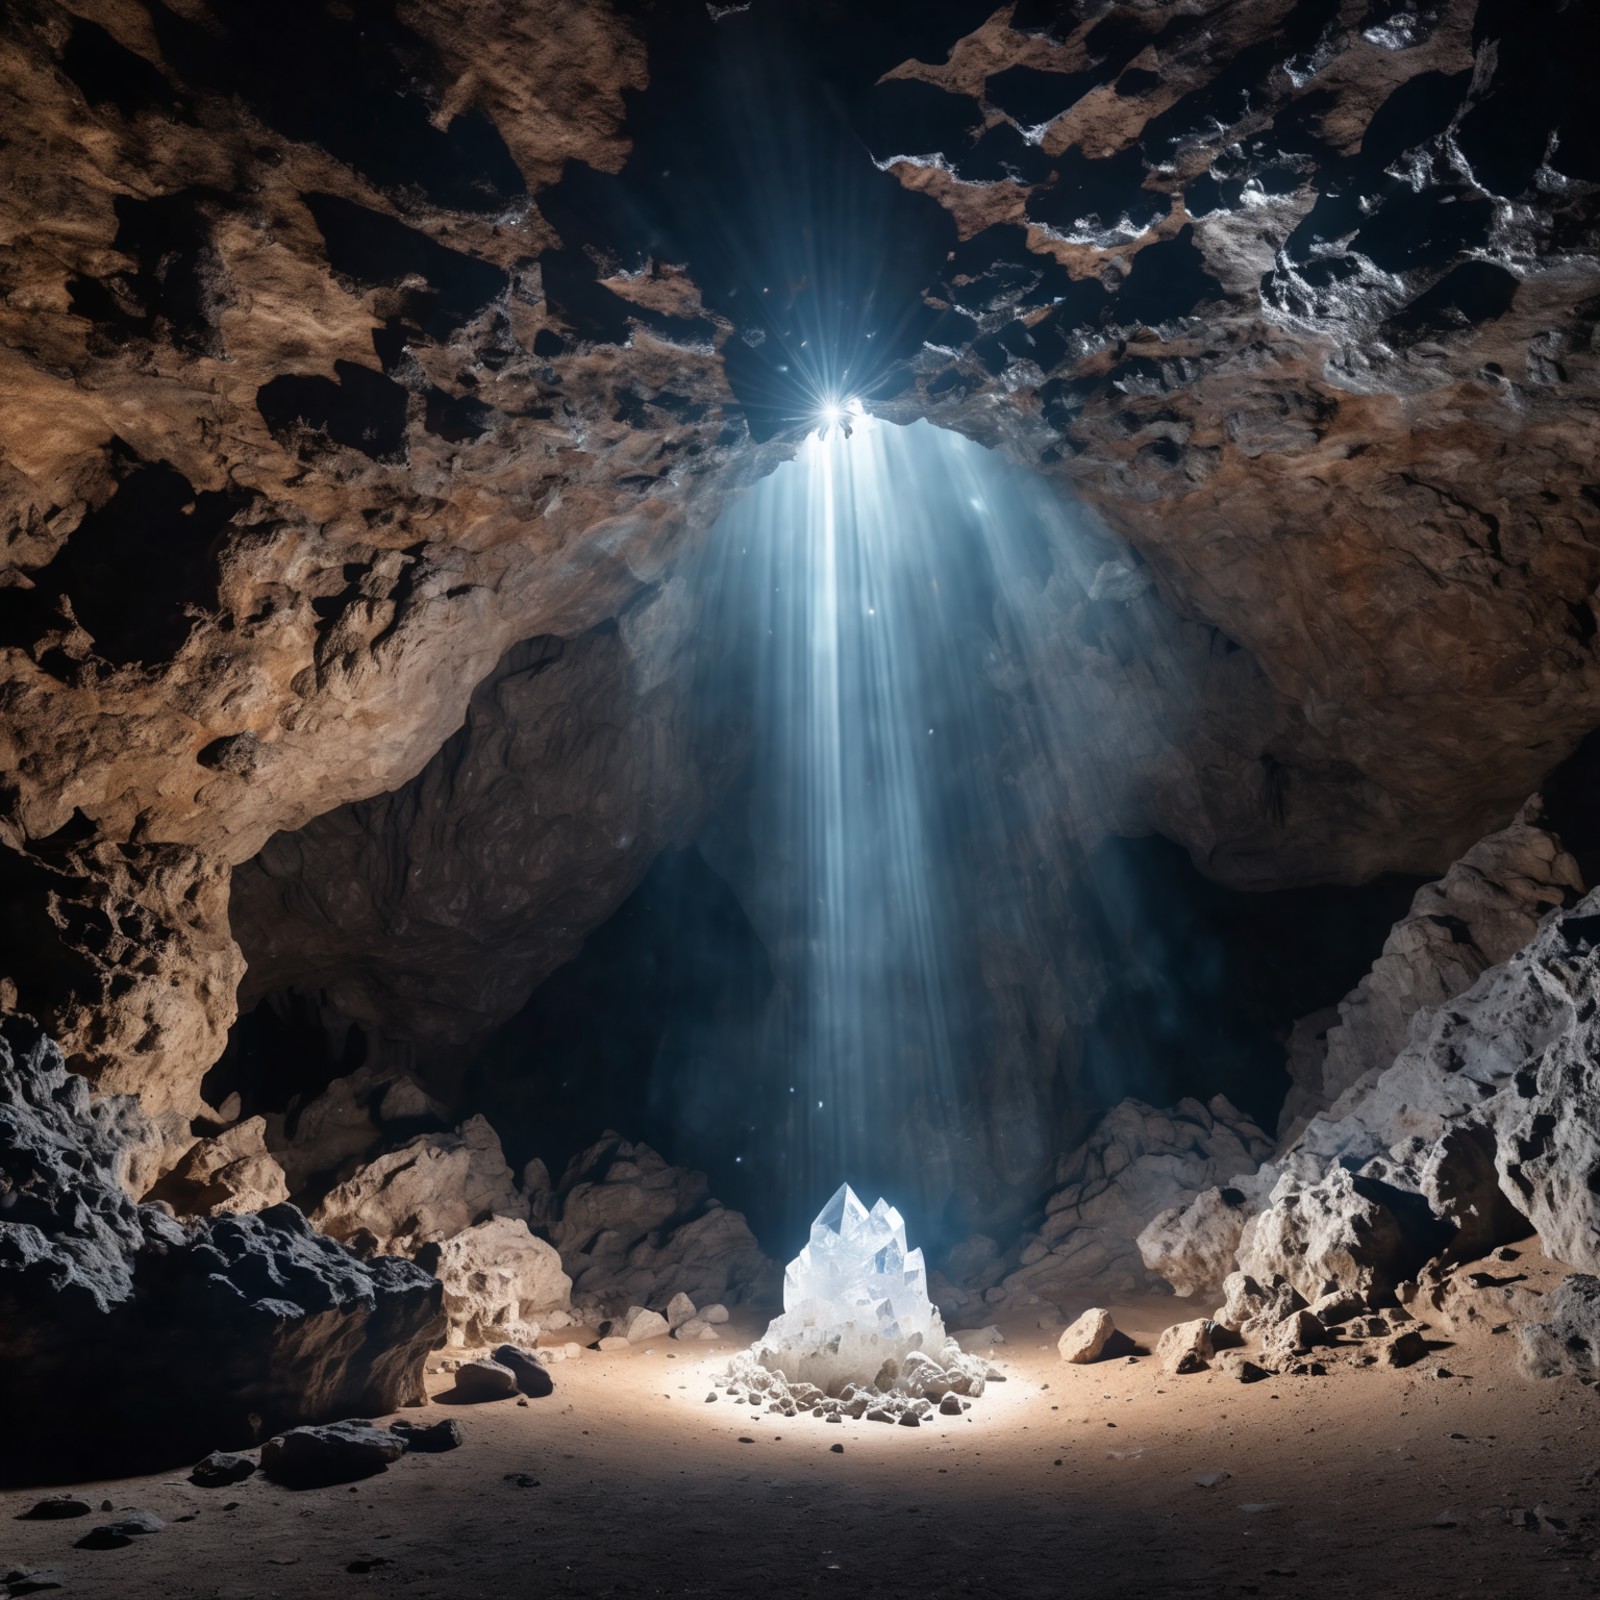 high-quality full hd 8k png dslr photo in phst artstyle with white balance color correction natural lighting of a cave wit...